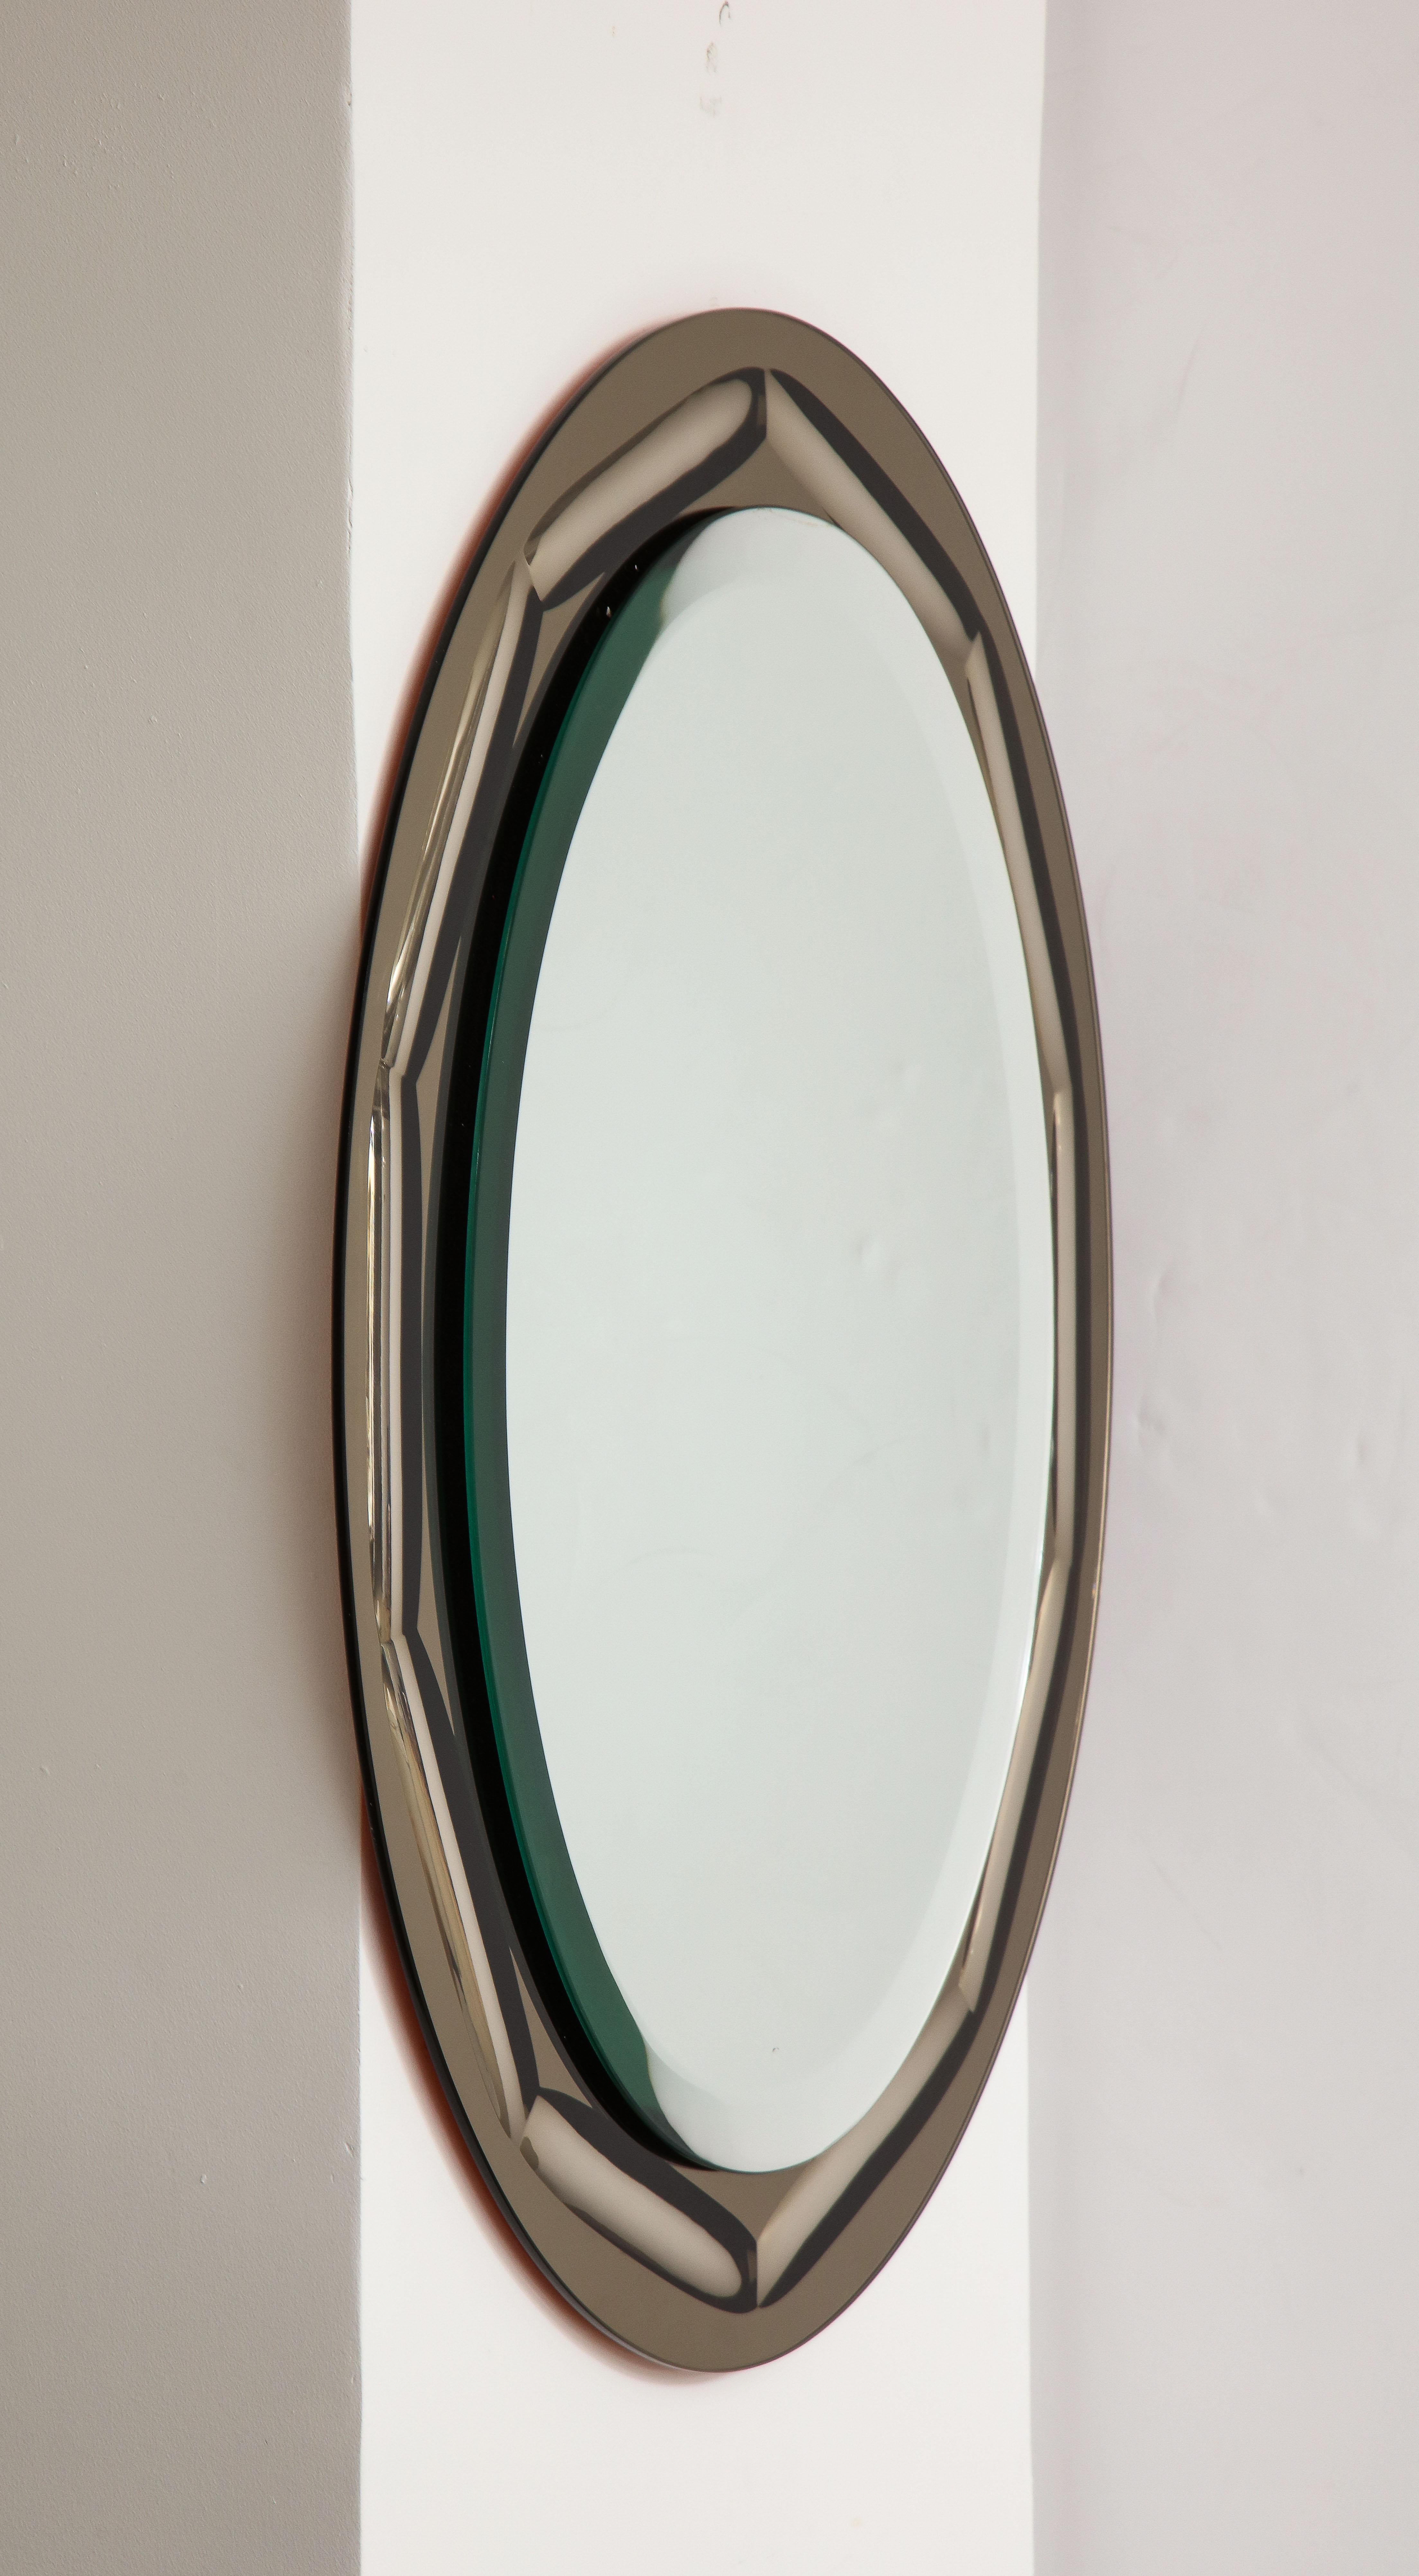 1950's Mid-Century Modern smoke glass with beveled edges Italian wall mirror, in vintage original condition with minor wear and patina due to age and use.